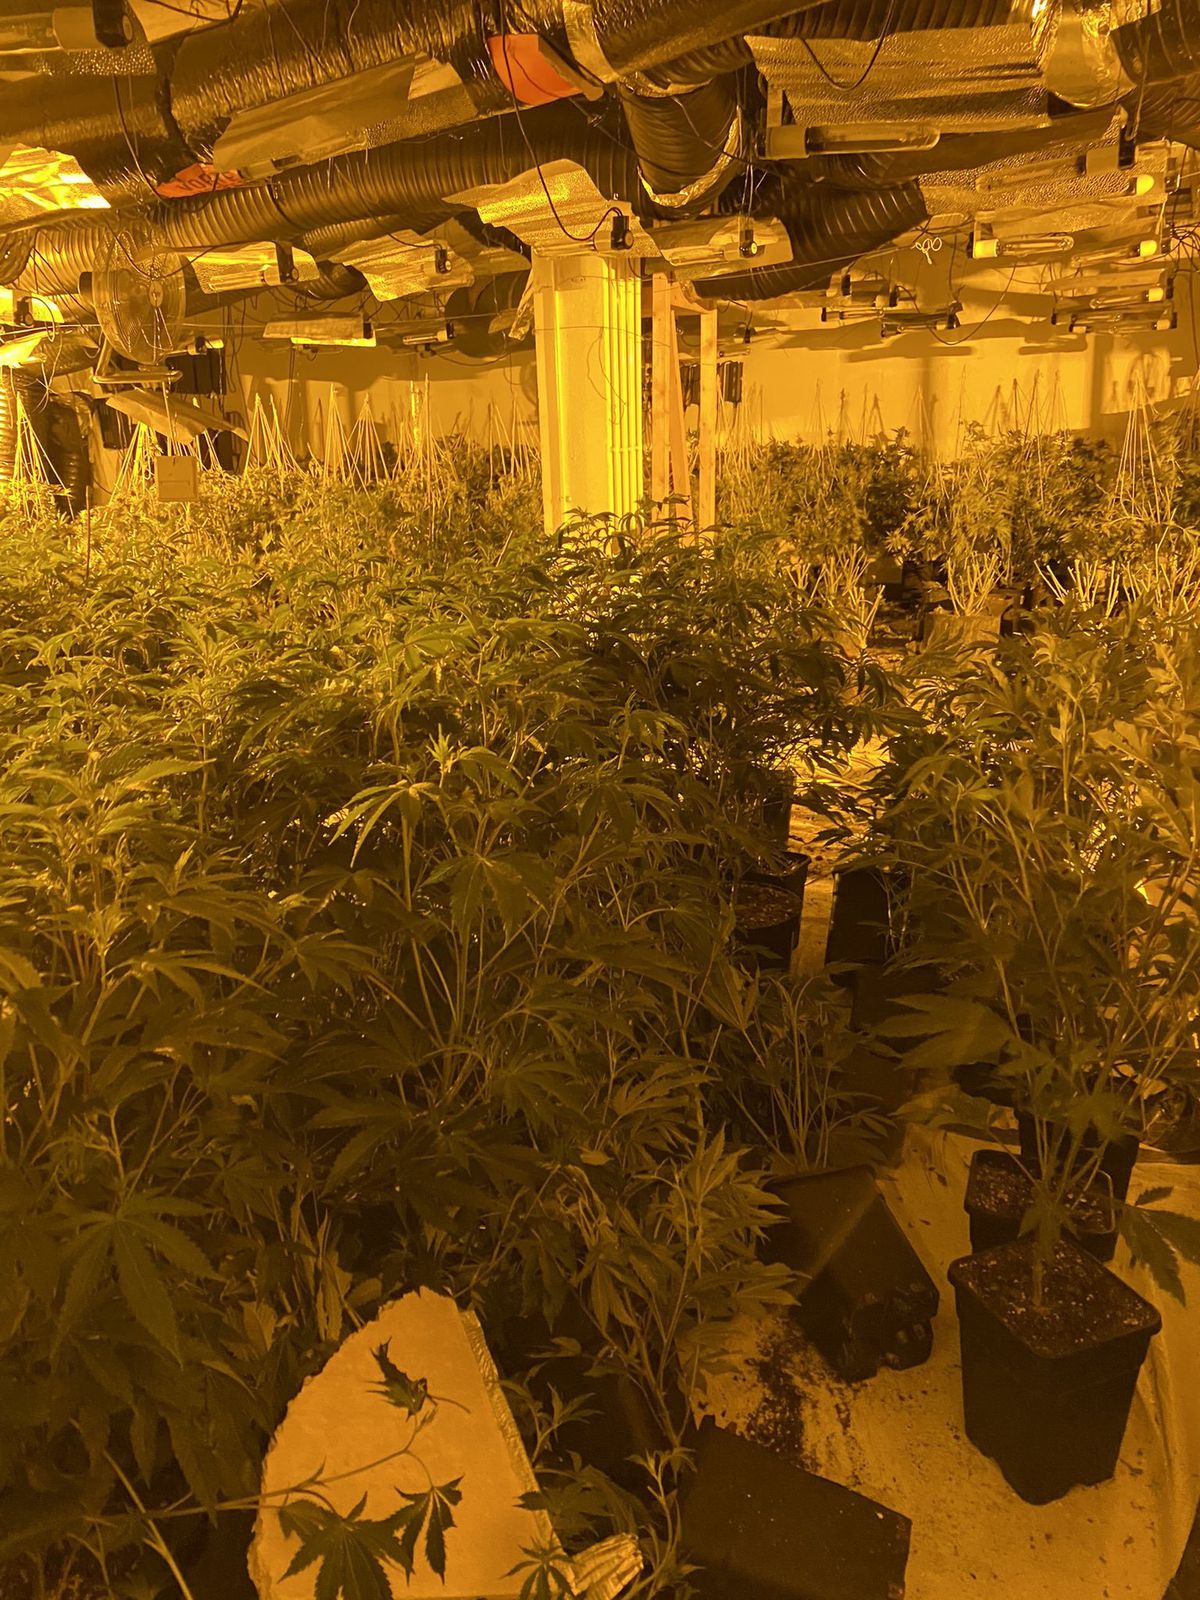 The cannabis farm uncovered by officers Photo:@DudleyTownWMP